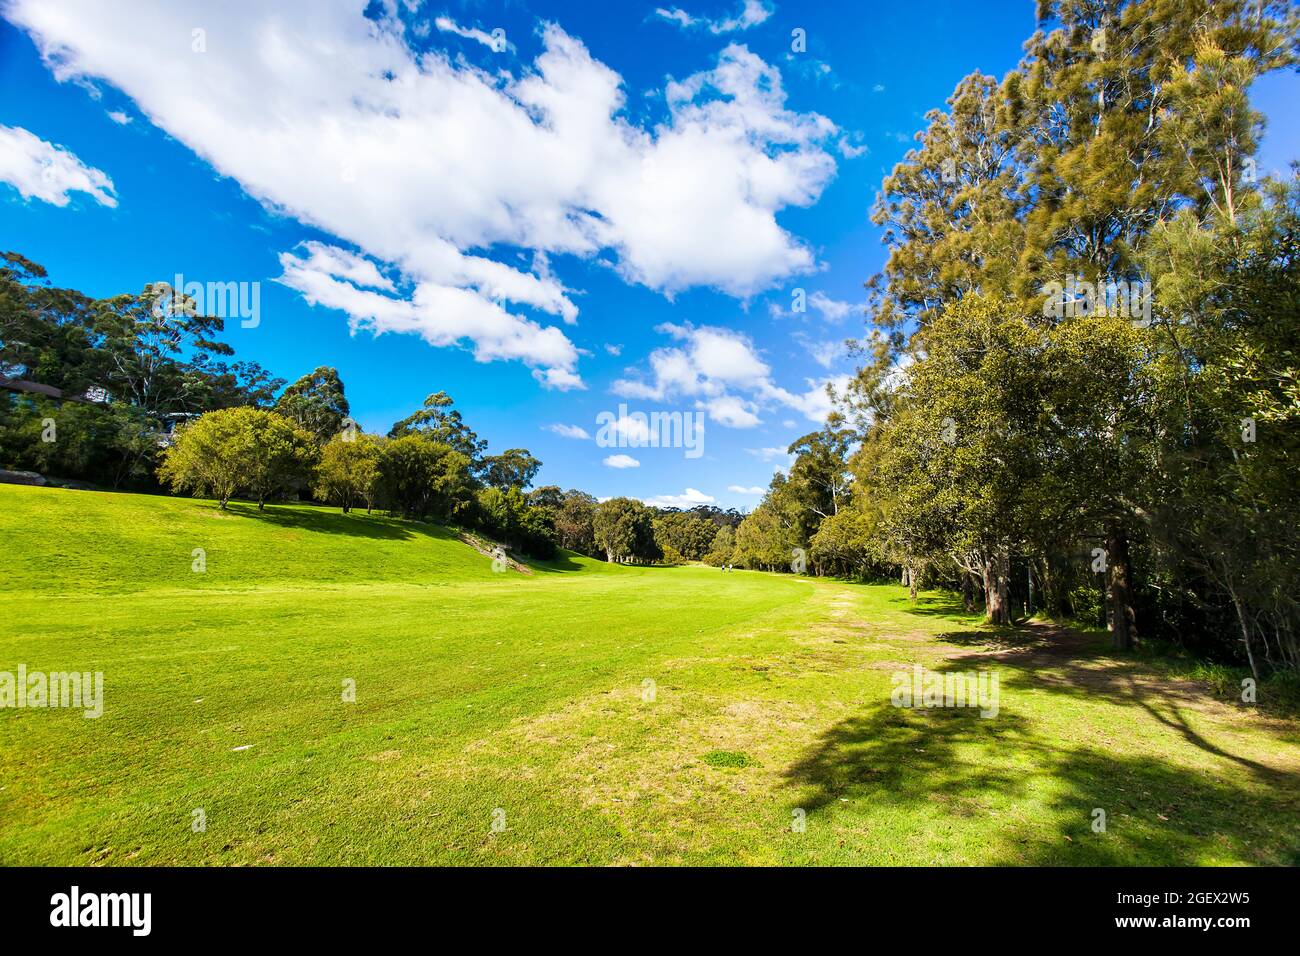 Green cultivated grassy lawn on banks of Lane Cove river - walking track along backyards of residential houses in public park. Stock Photo